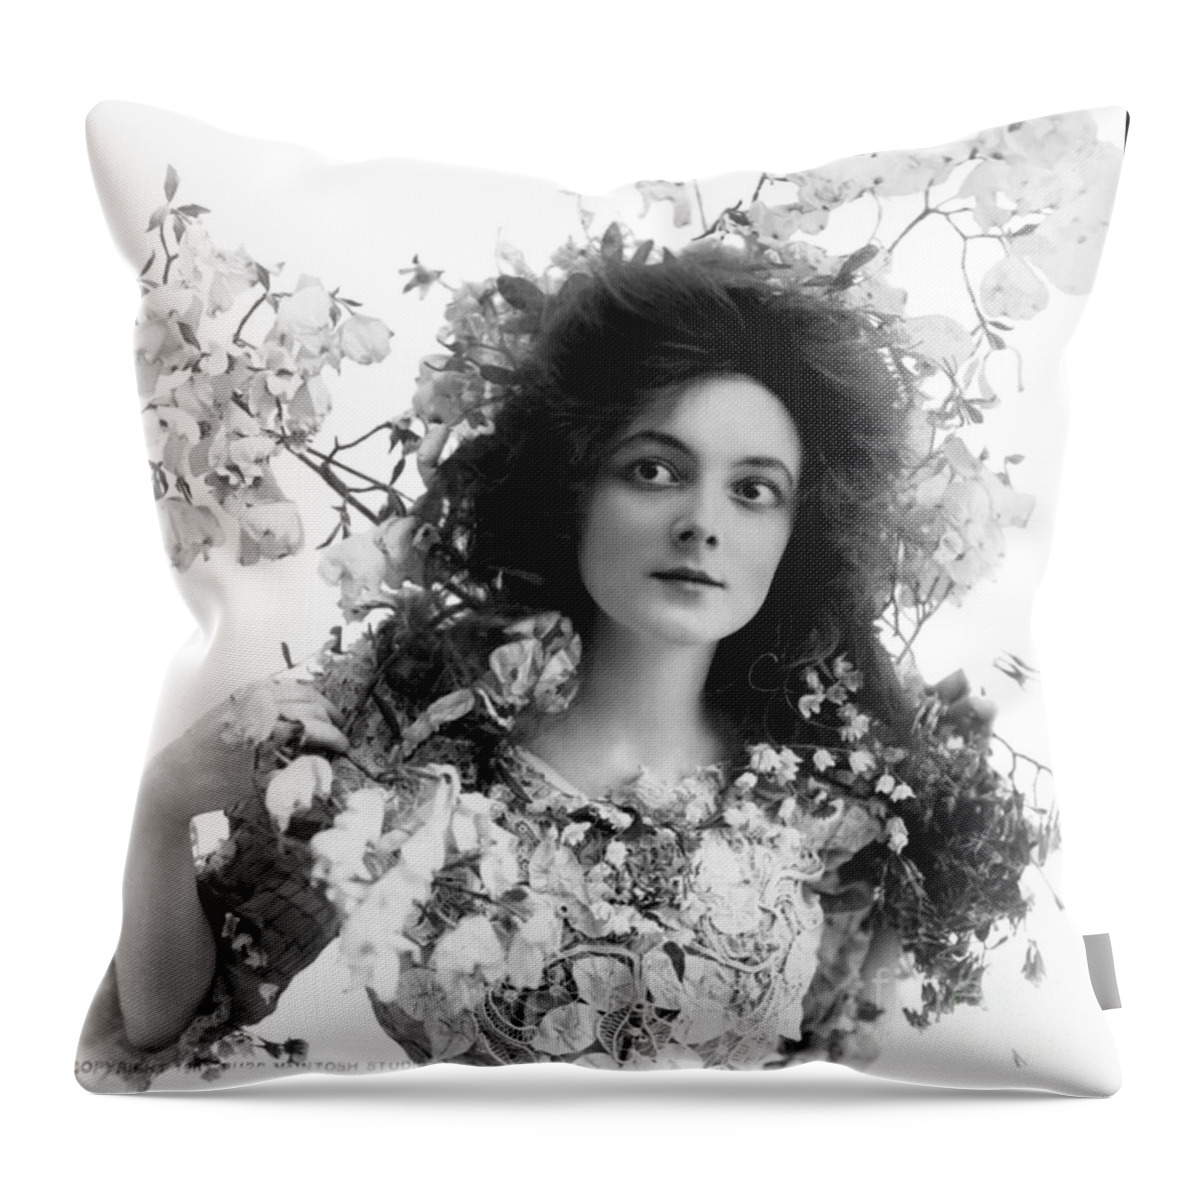 Marie Doro Throw Pillow featuring the photograph Marie Doro by Sad Hill - Bizarre Los Angeles Archive